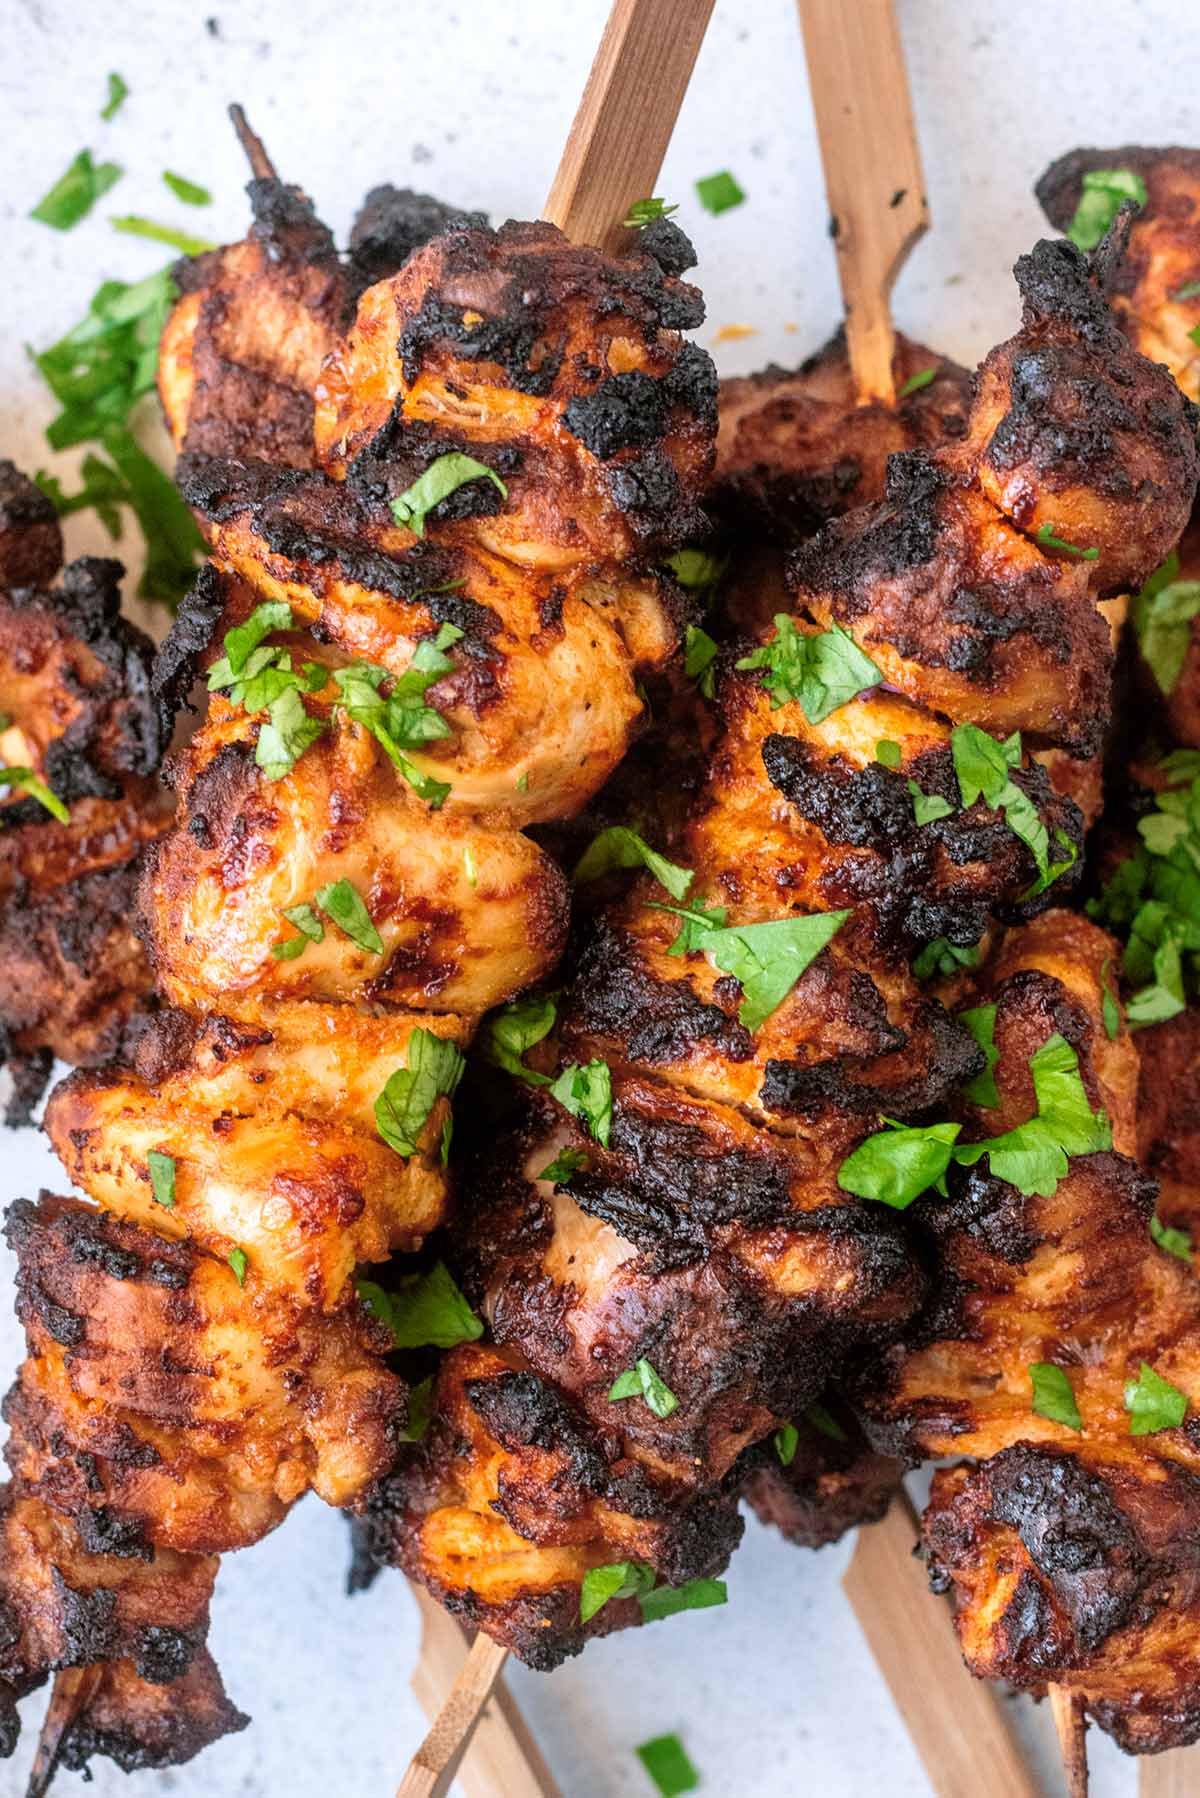 Chicken skewers with chopped herbs scattered over them.